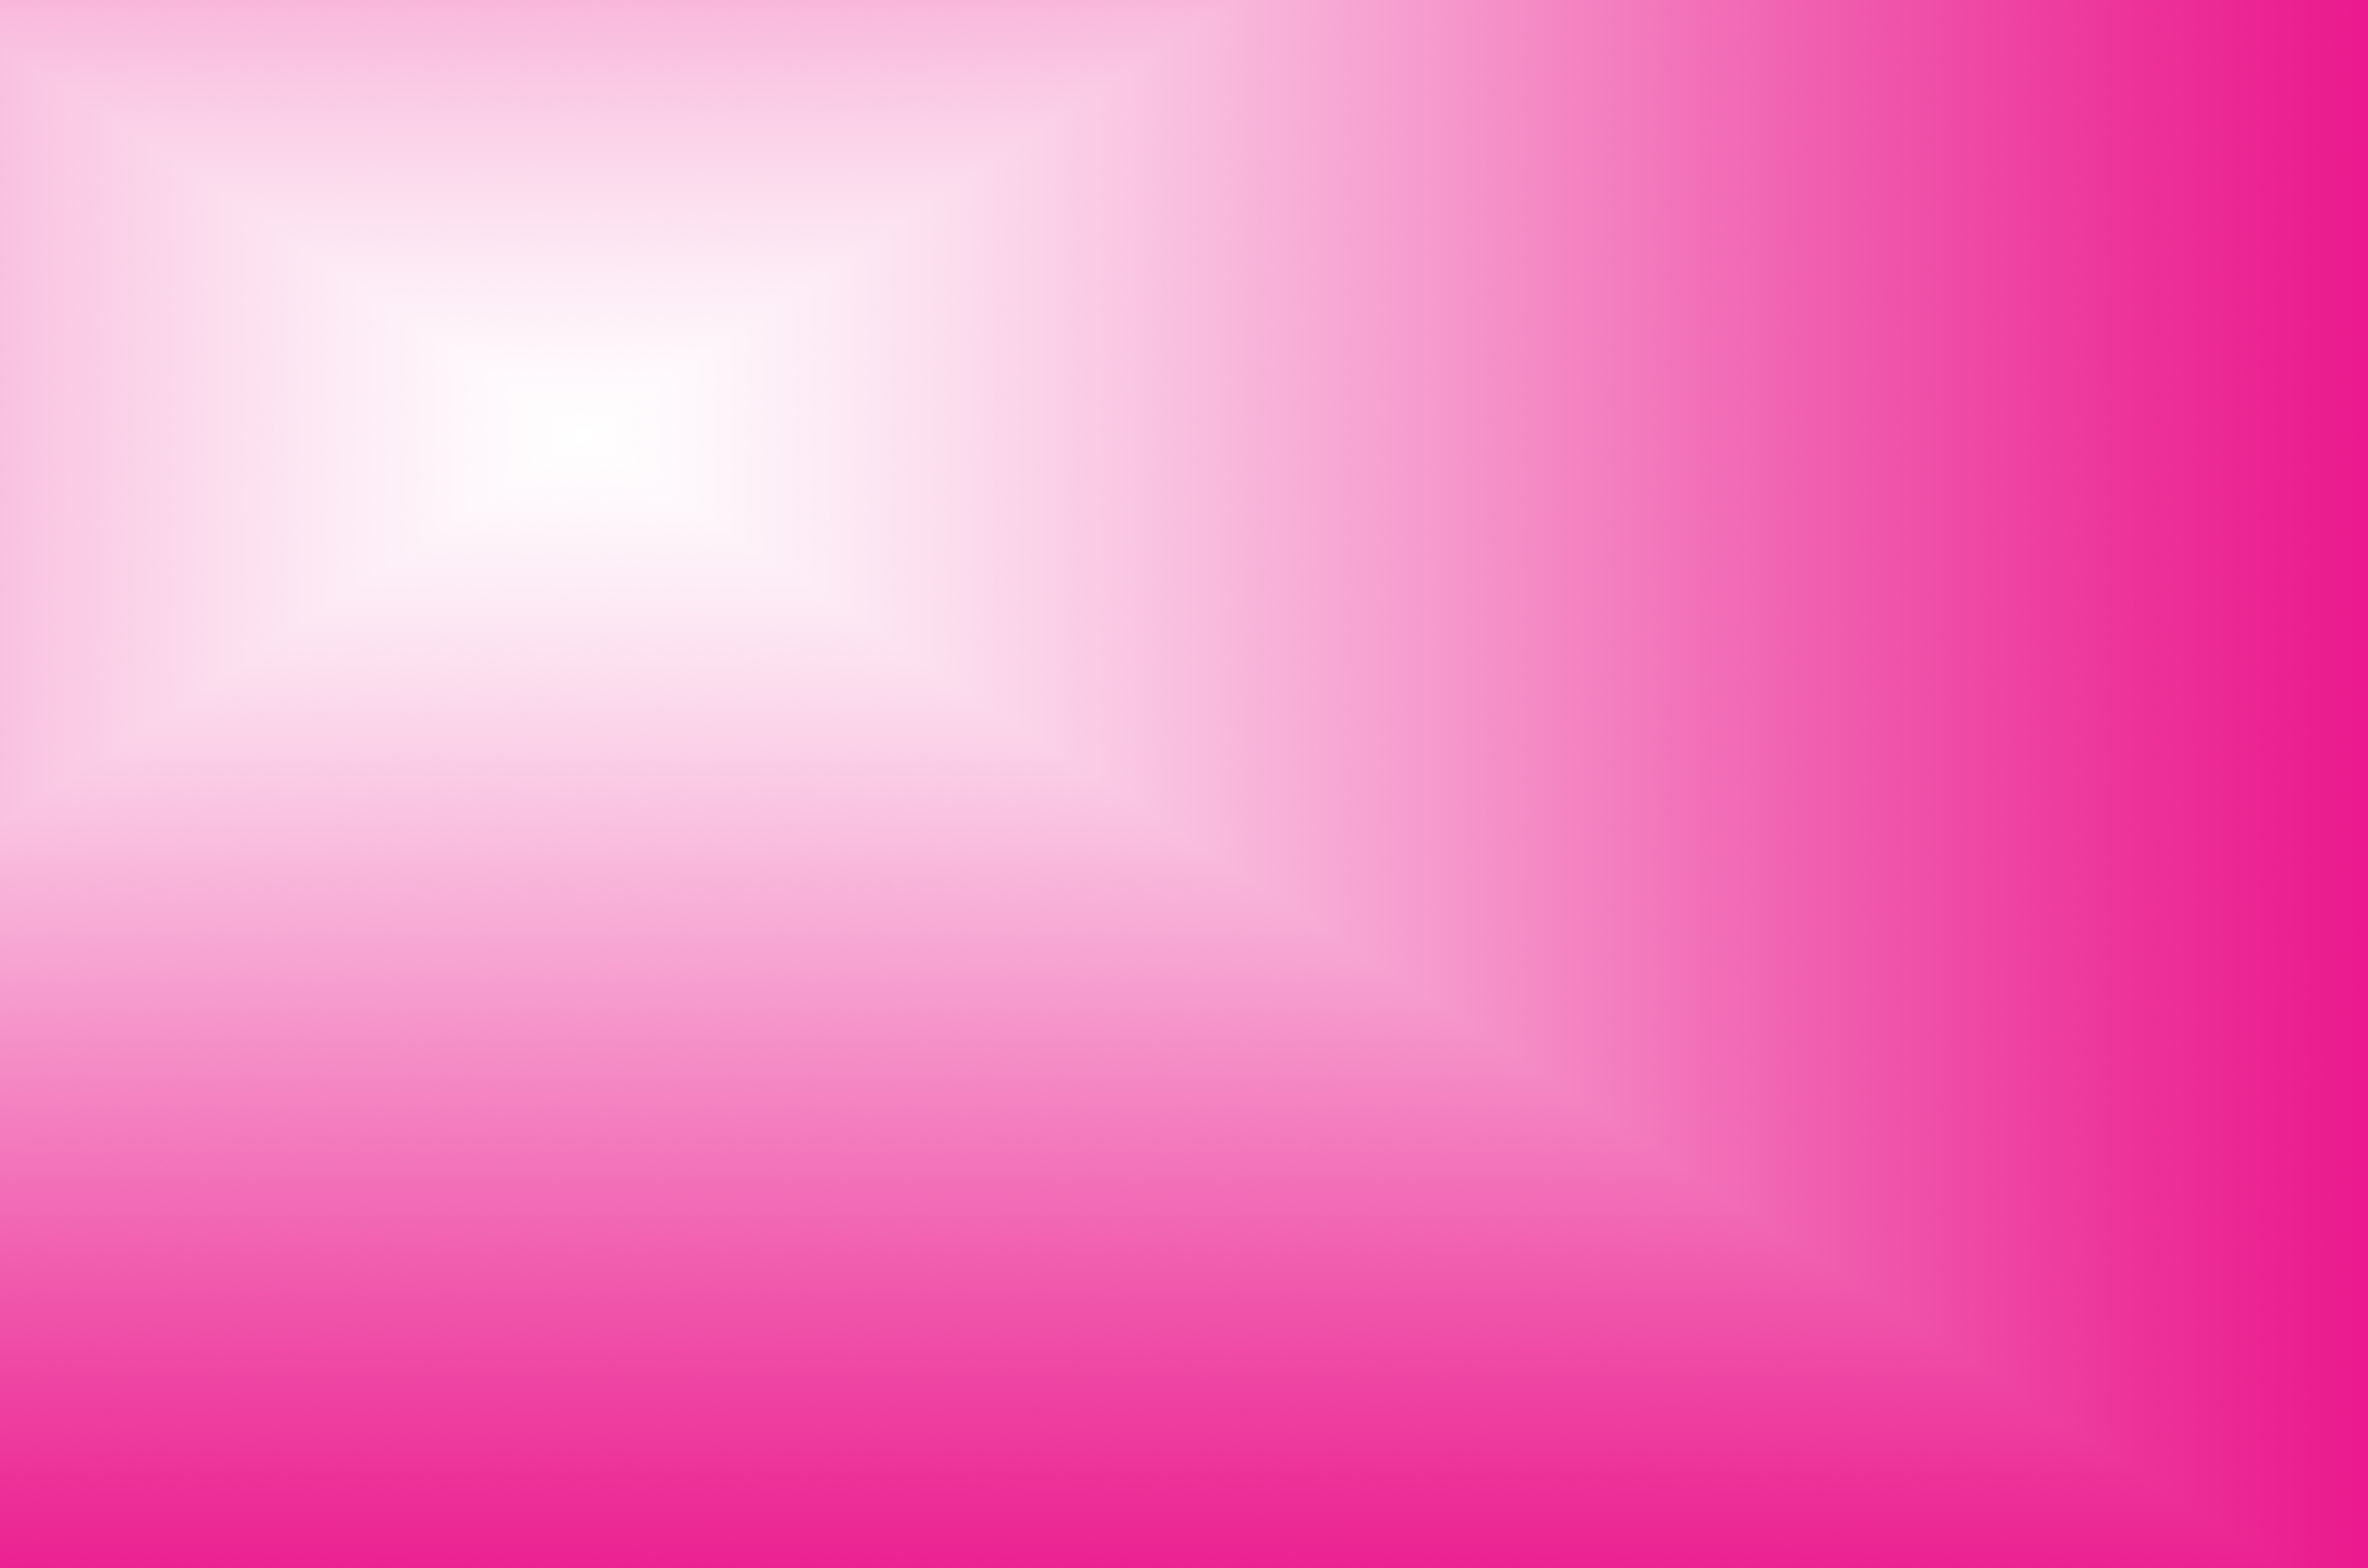 Illustration of Stunning Gradient Hot Pink with White Beams